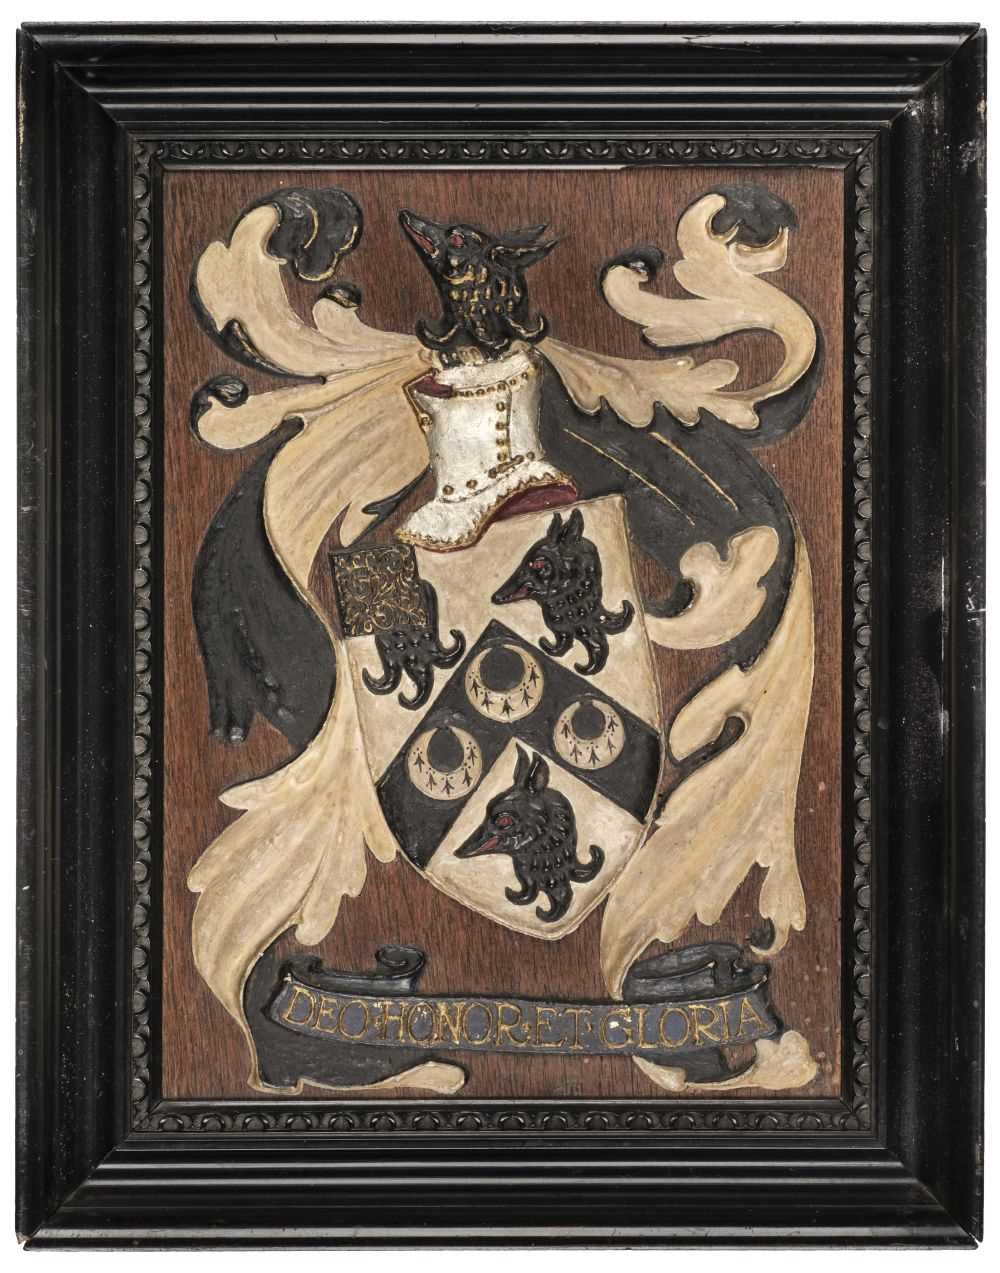 Lot 375 - Heraldry. An armorial panel of Major F.P.R. Nichols M.C.  R.A.S.C., early 20th century